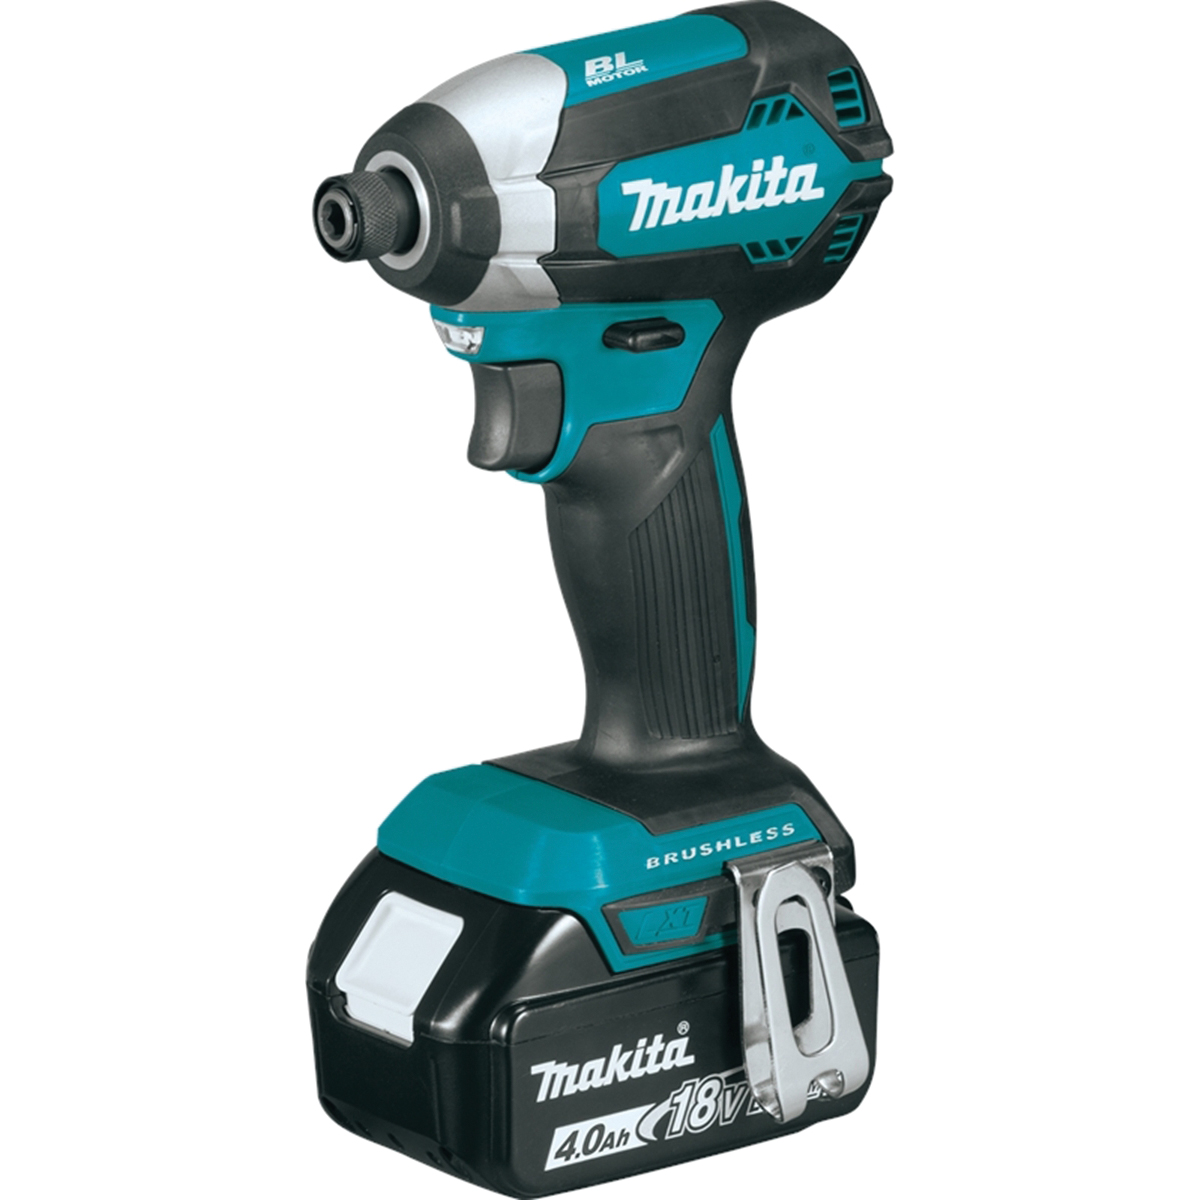 Makita LXT XDT13SM1 Cordless Impact Driver, Battery Included, 18 V, 4 Ah, 1/4 in Drive, Hex Drive, 0 to 3600 ipm - 2